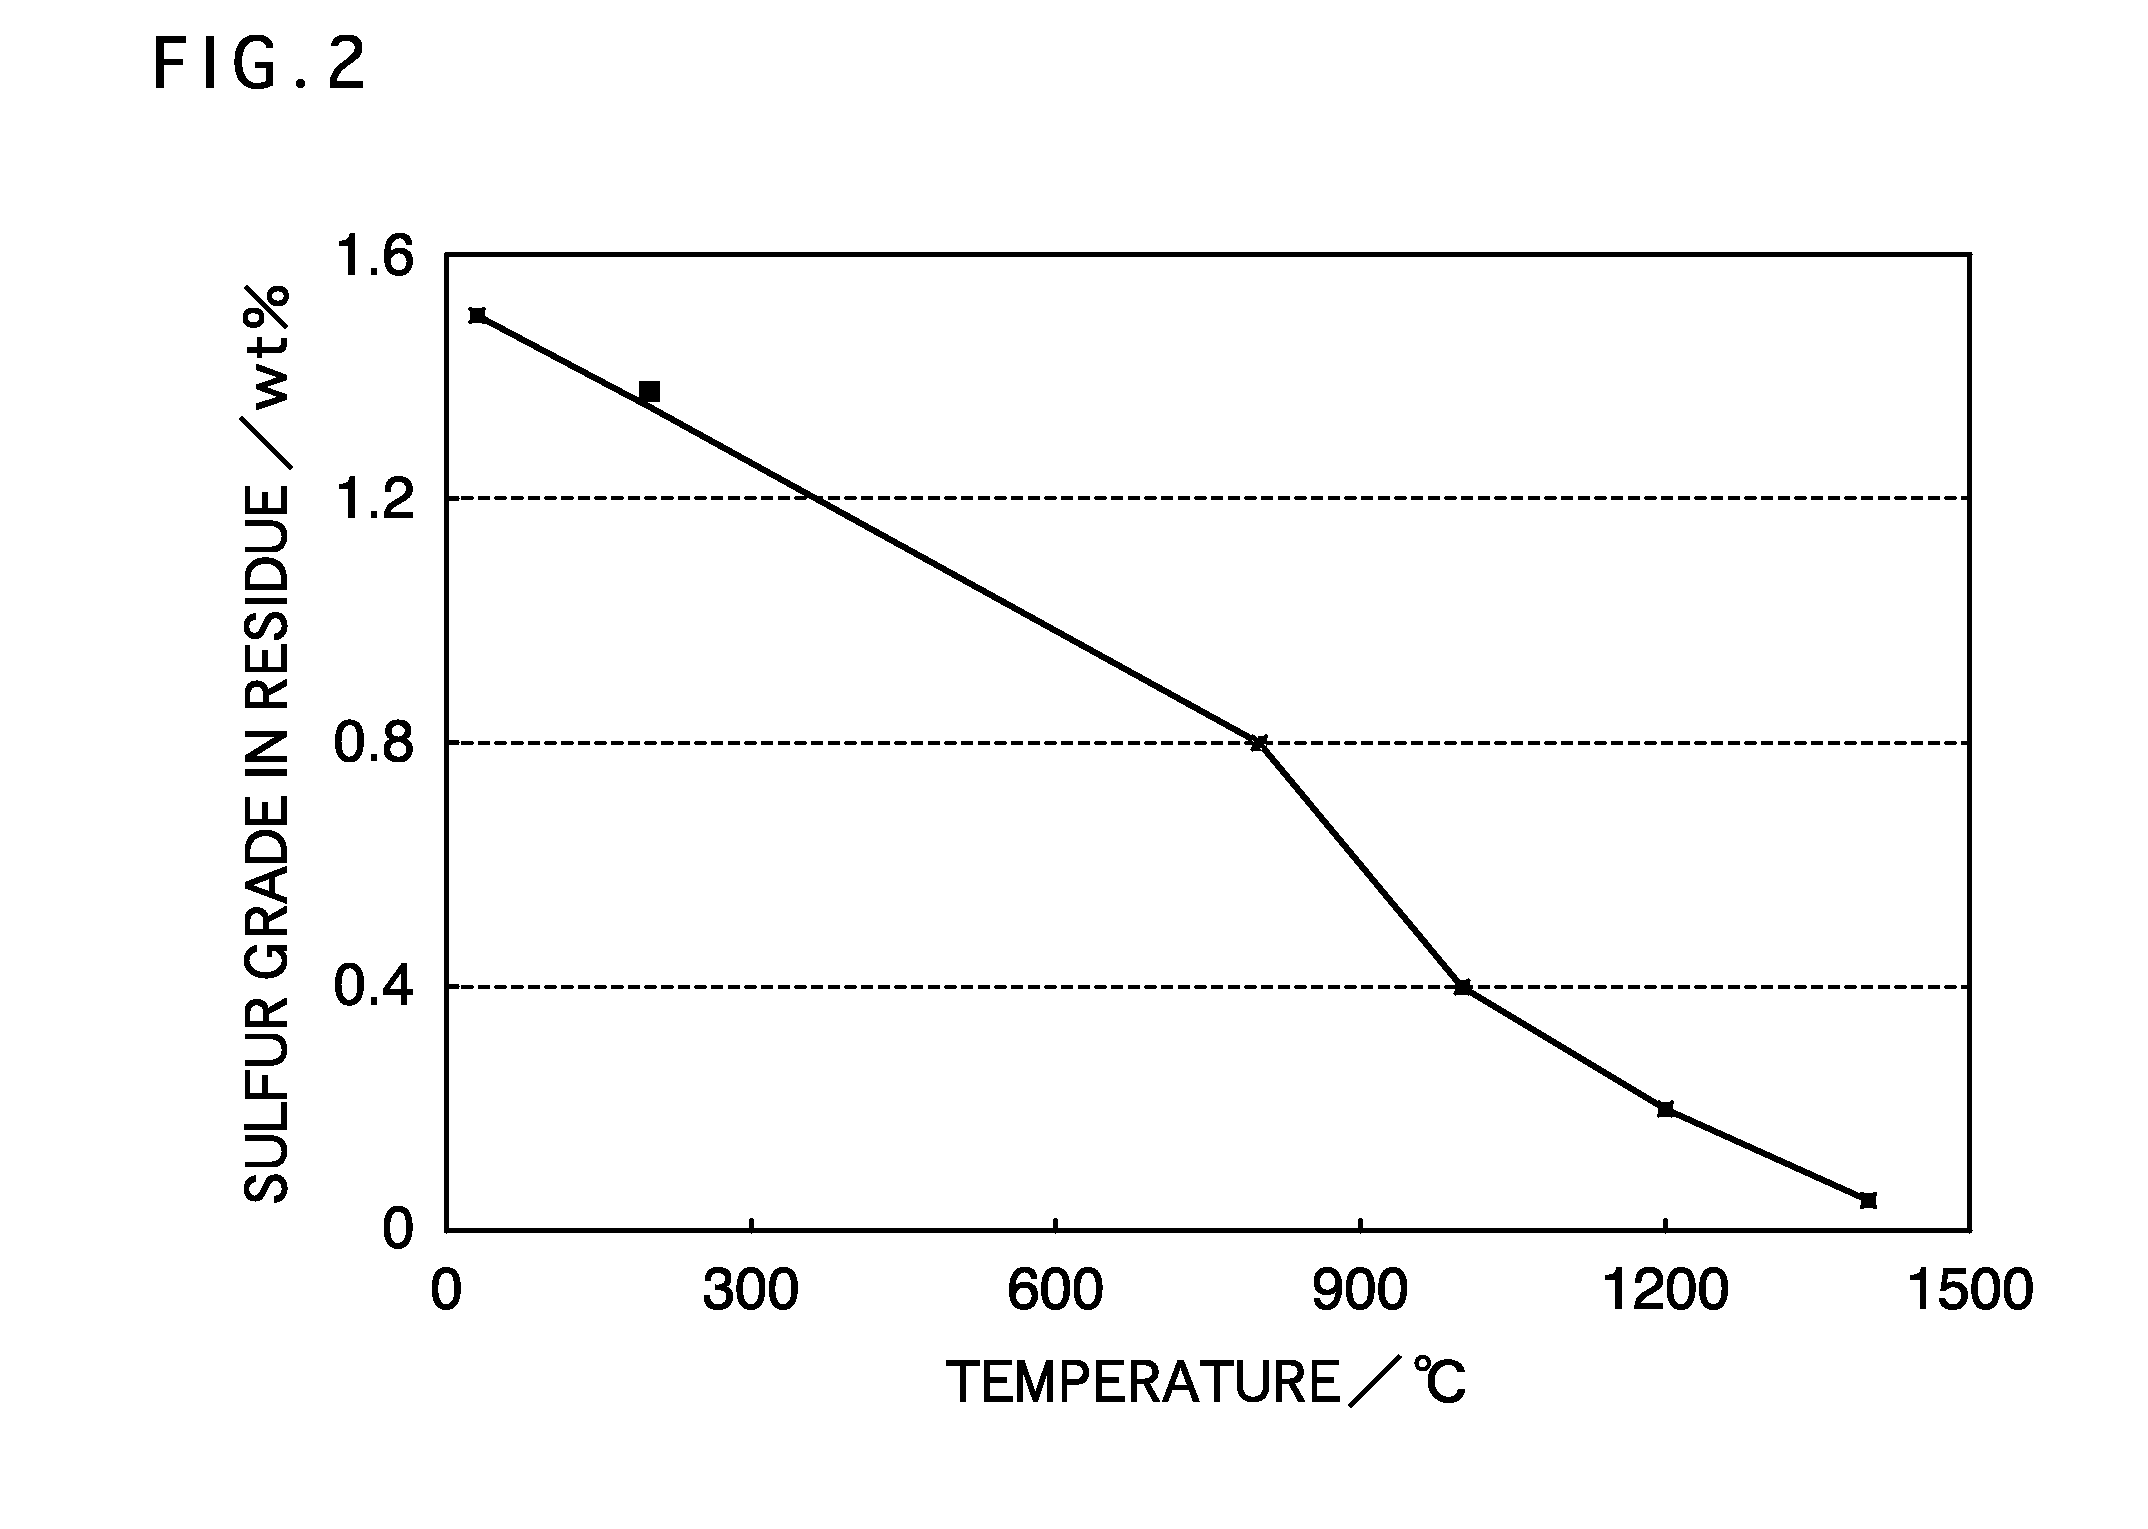 Production method for hematite for iron production